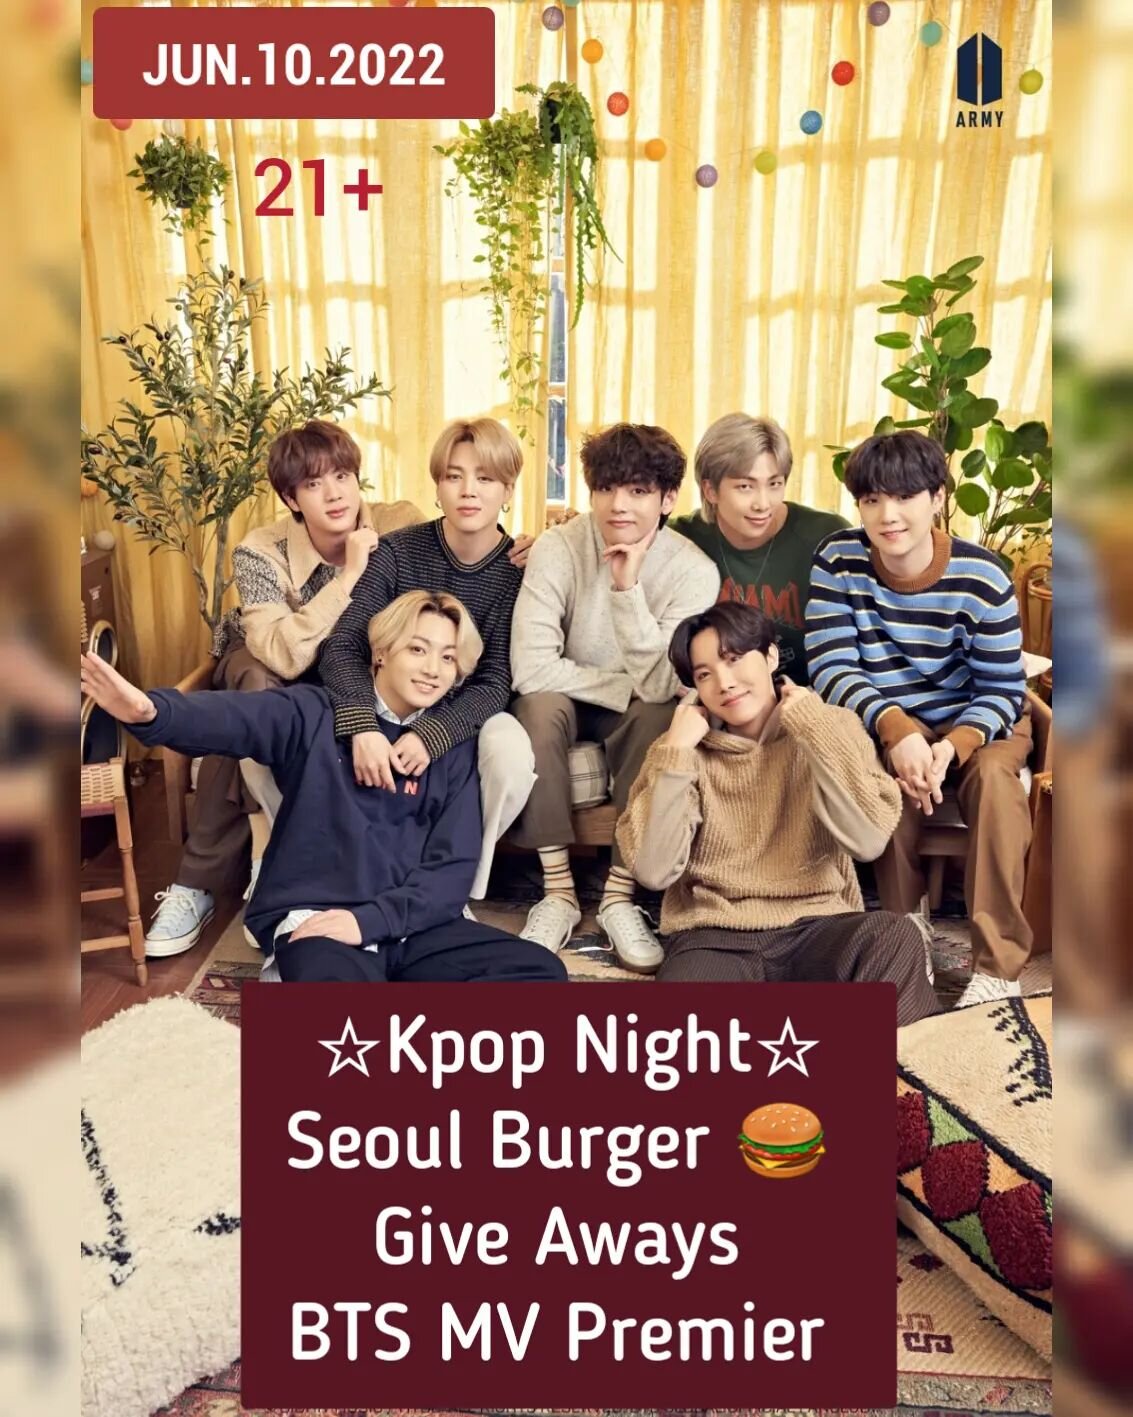 Come and join us on June 10th from 8pm-11:30pm. We will be celebrating the premiere of BTS music video &quot;Yet To Come&quot; with our Seoul Burger, BTS merch give aways, and kpop music throughout the night. Music  video premieres at 11pm and this i